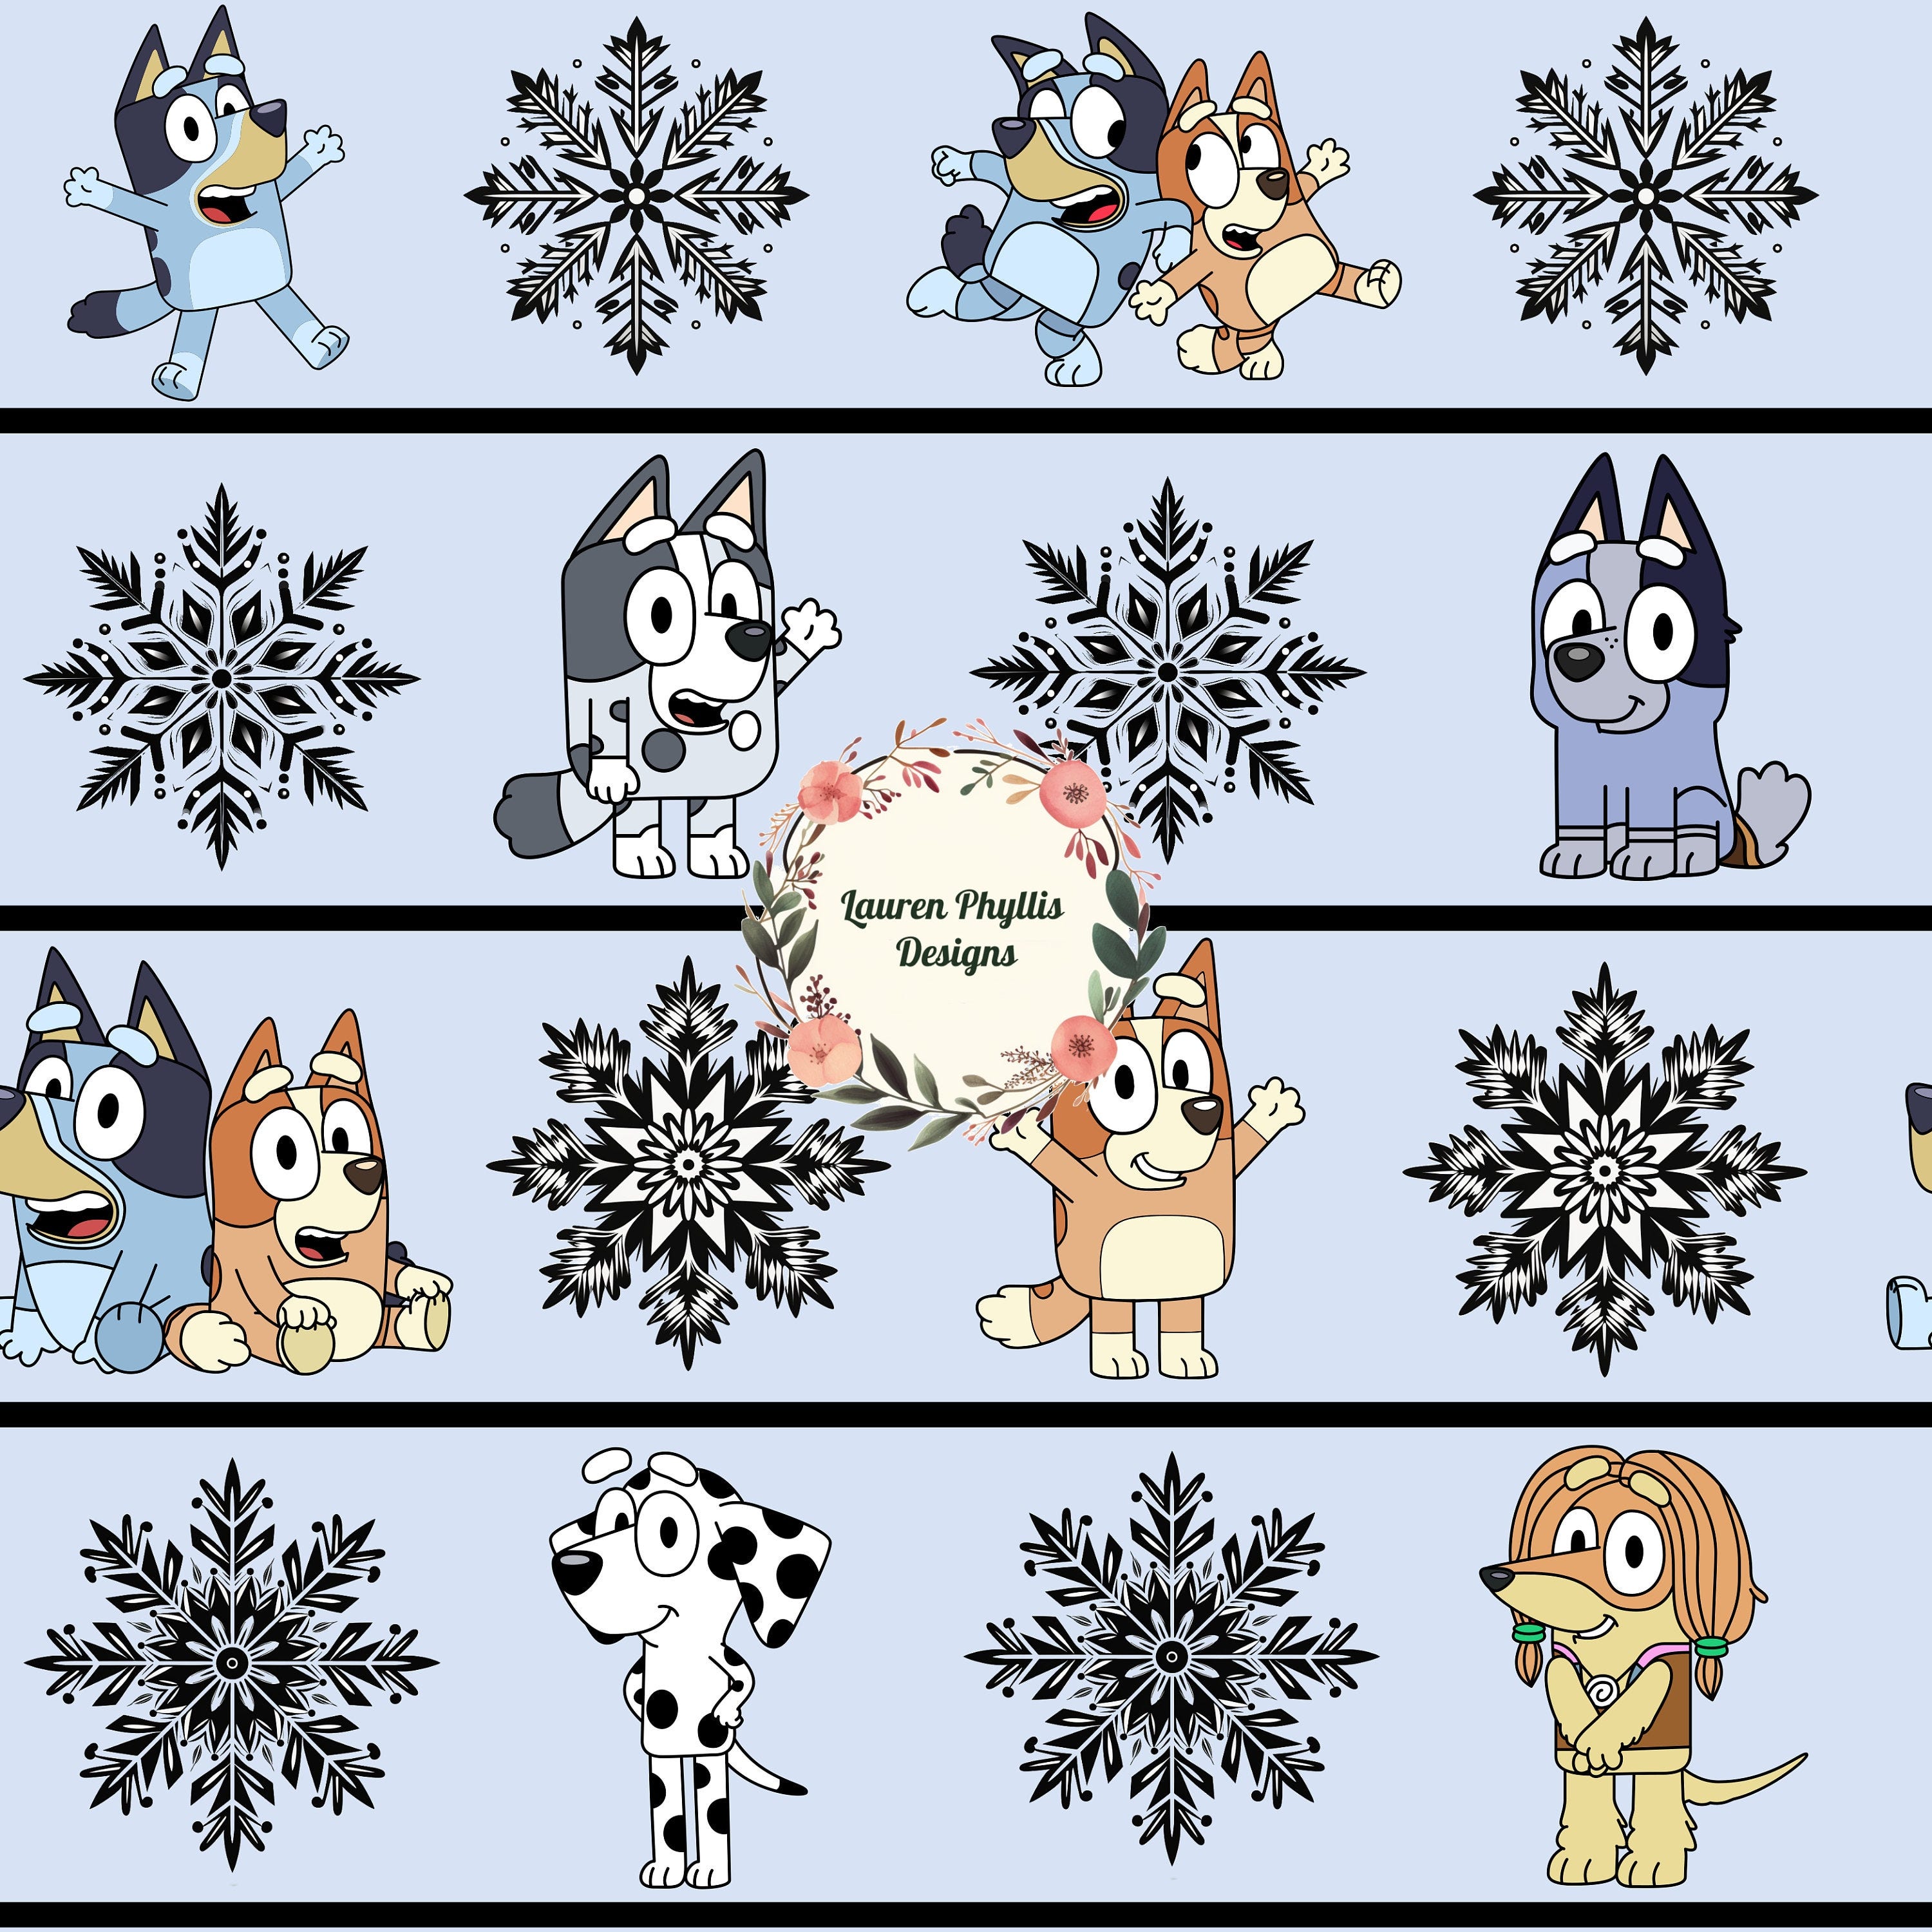 Cartoon dogs sweater print with snowflakes seamless file design for fabric printing and sublimation, boys cartoon repeating pattern holidays